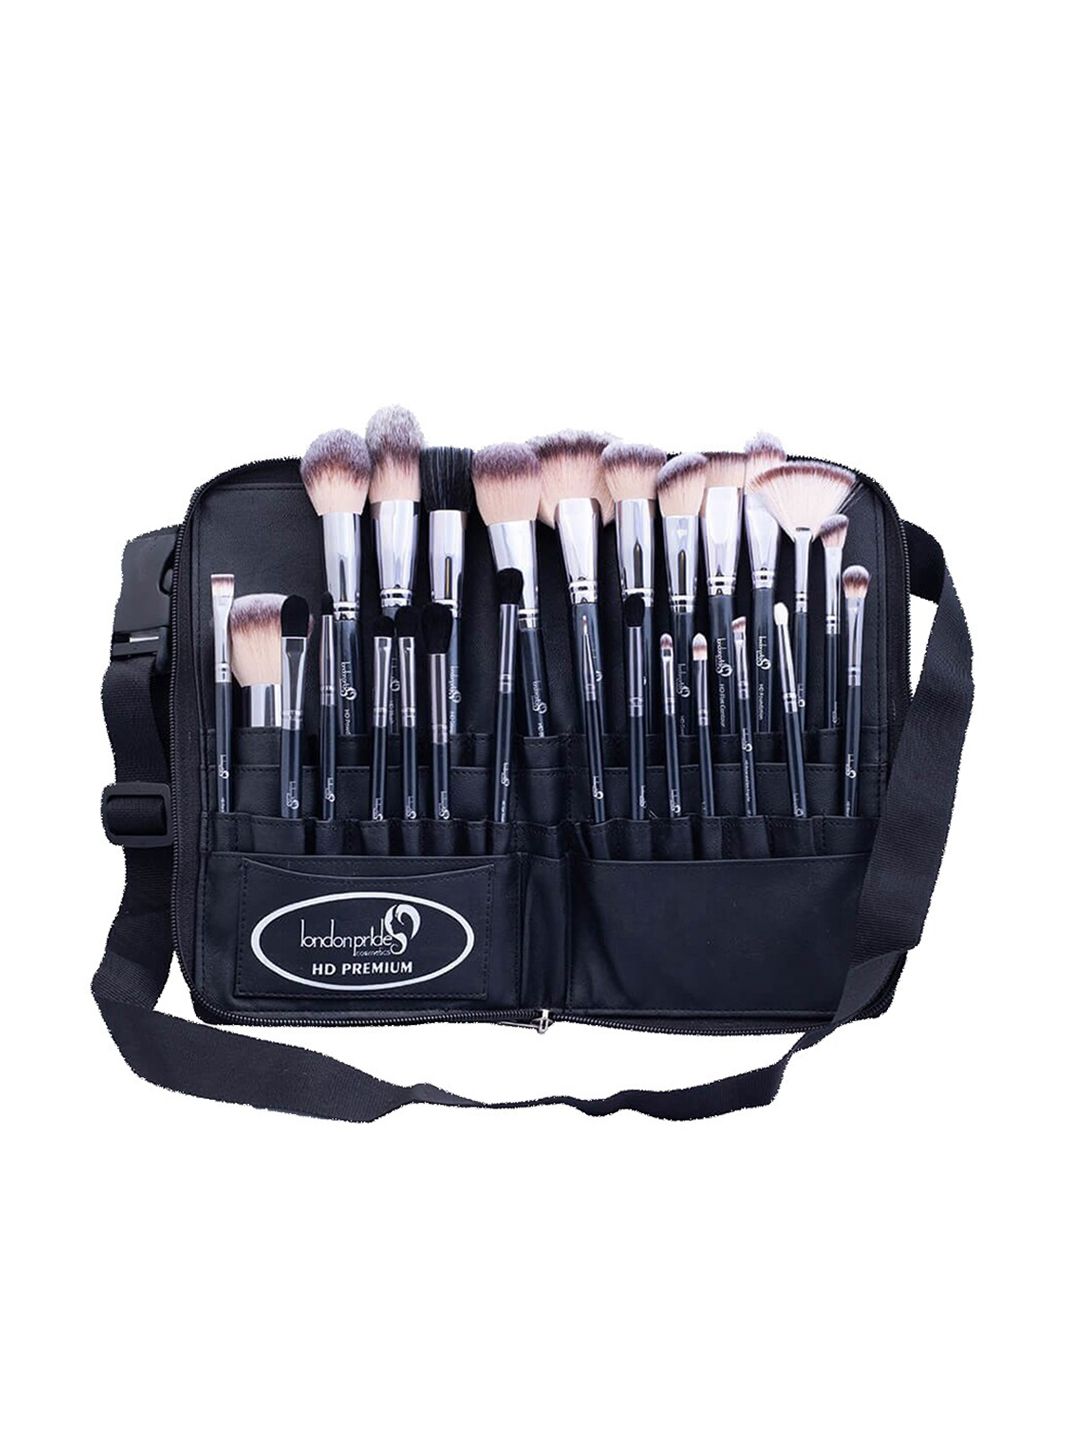 london pride cosmetics Set of 26 HD Professional Makeup Brushes Price in India